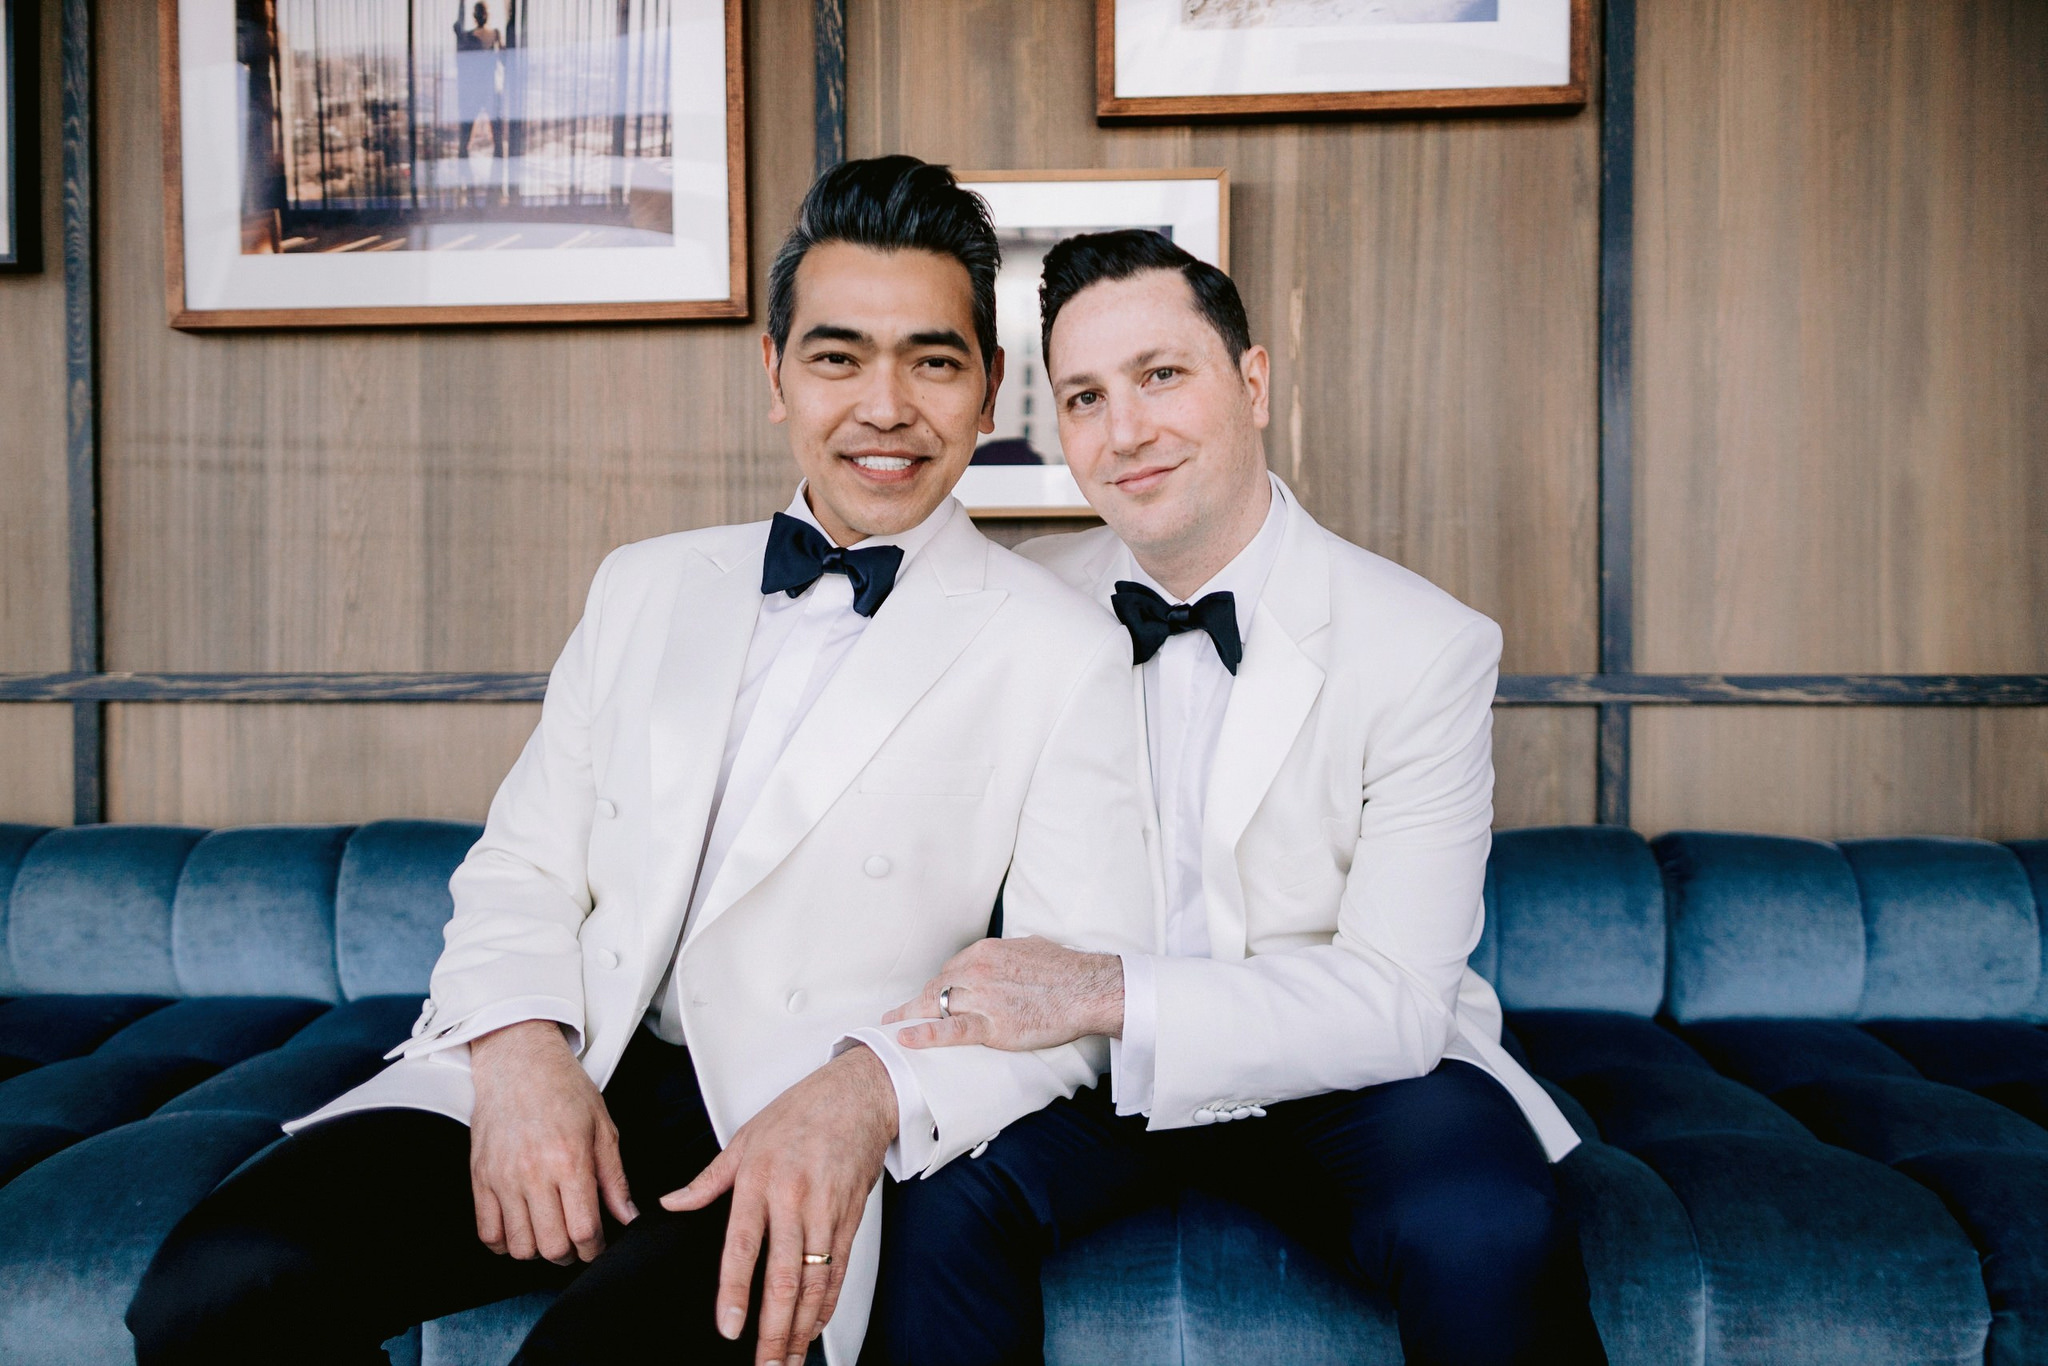 Same sex male couple sitting together smiling wearing white suits with black bow ties for their wedding